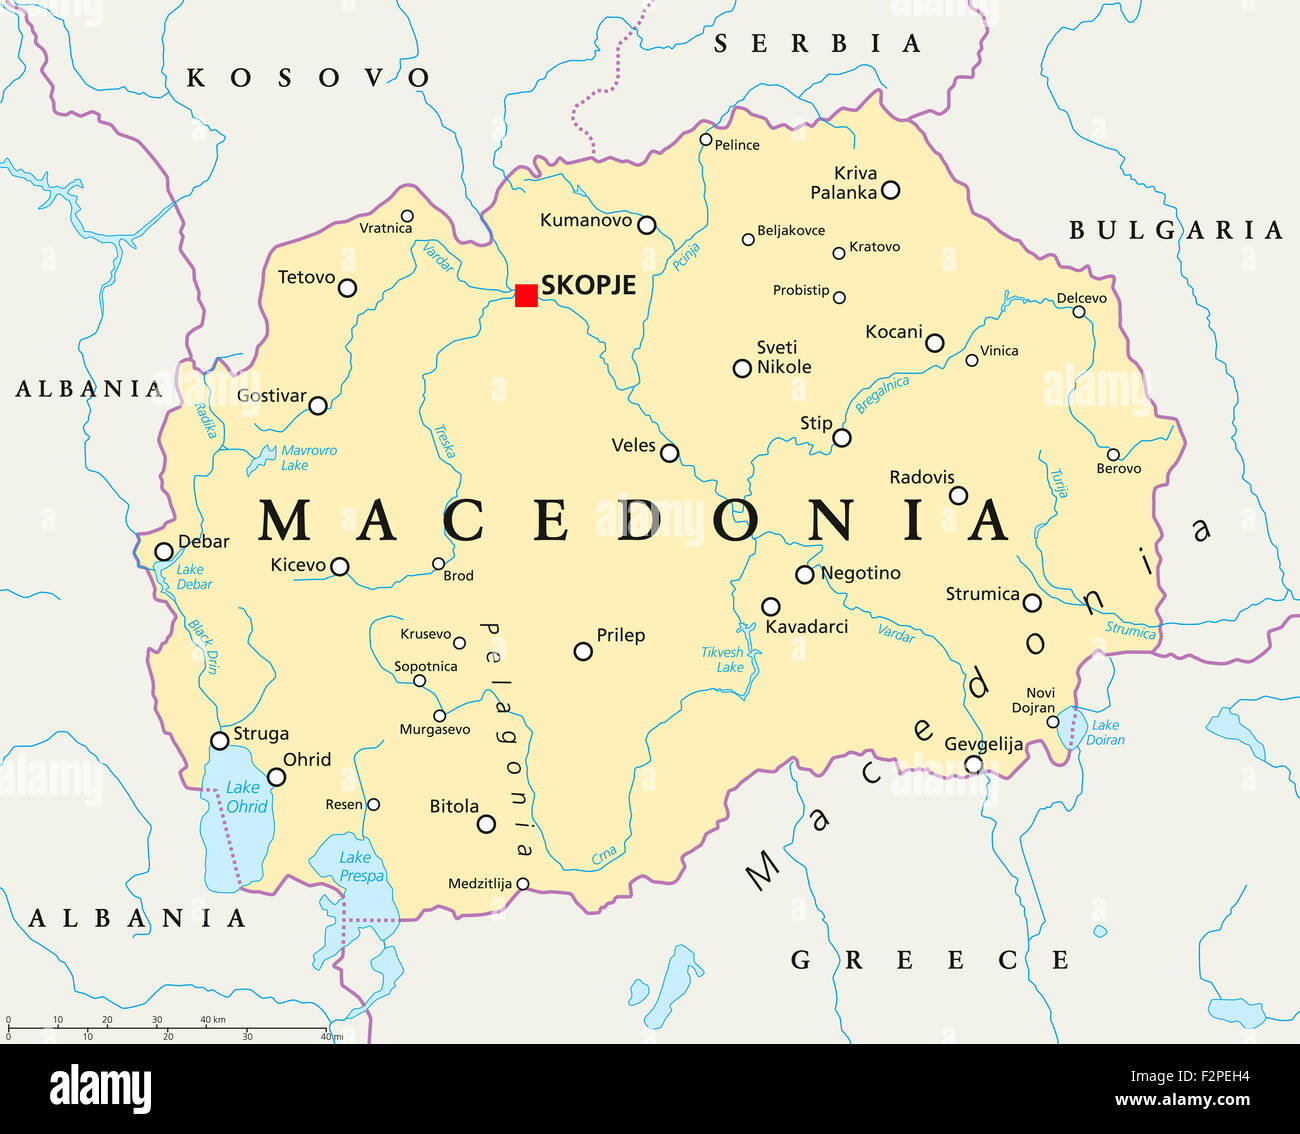 Macedonia political map with capital Skopje, national borders, important cities, rivers and lakes. English labeling and scaling. Stock Photo